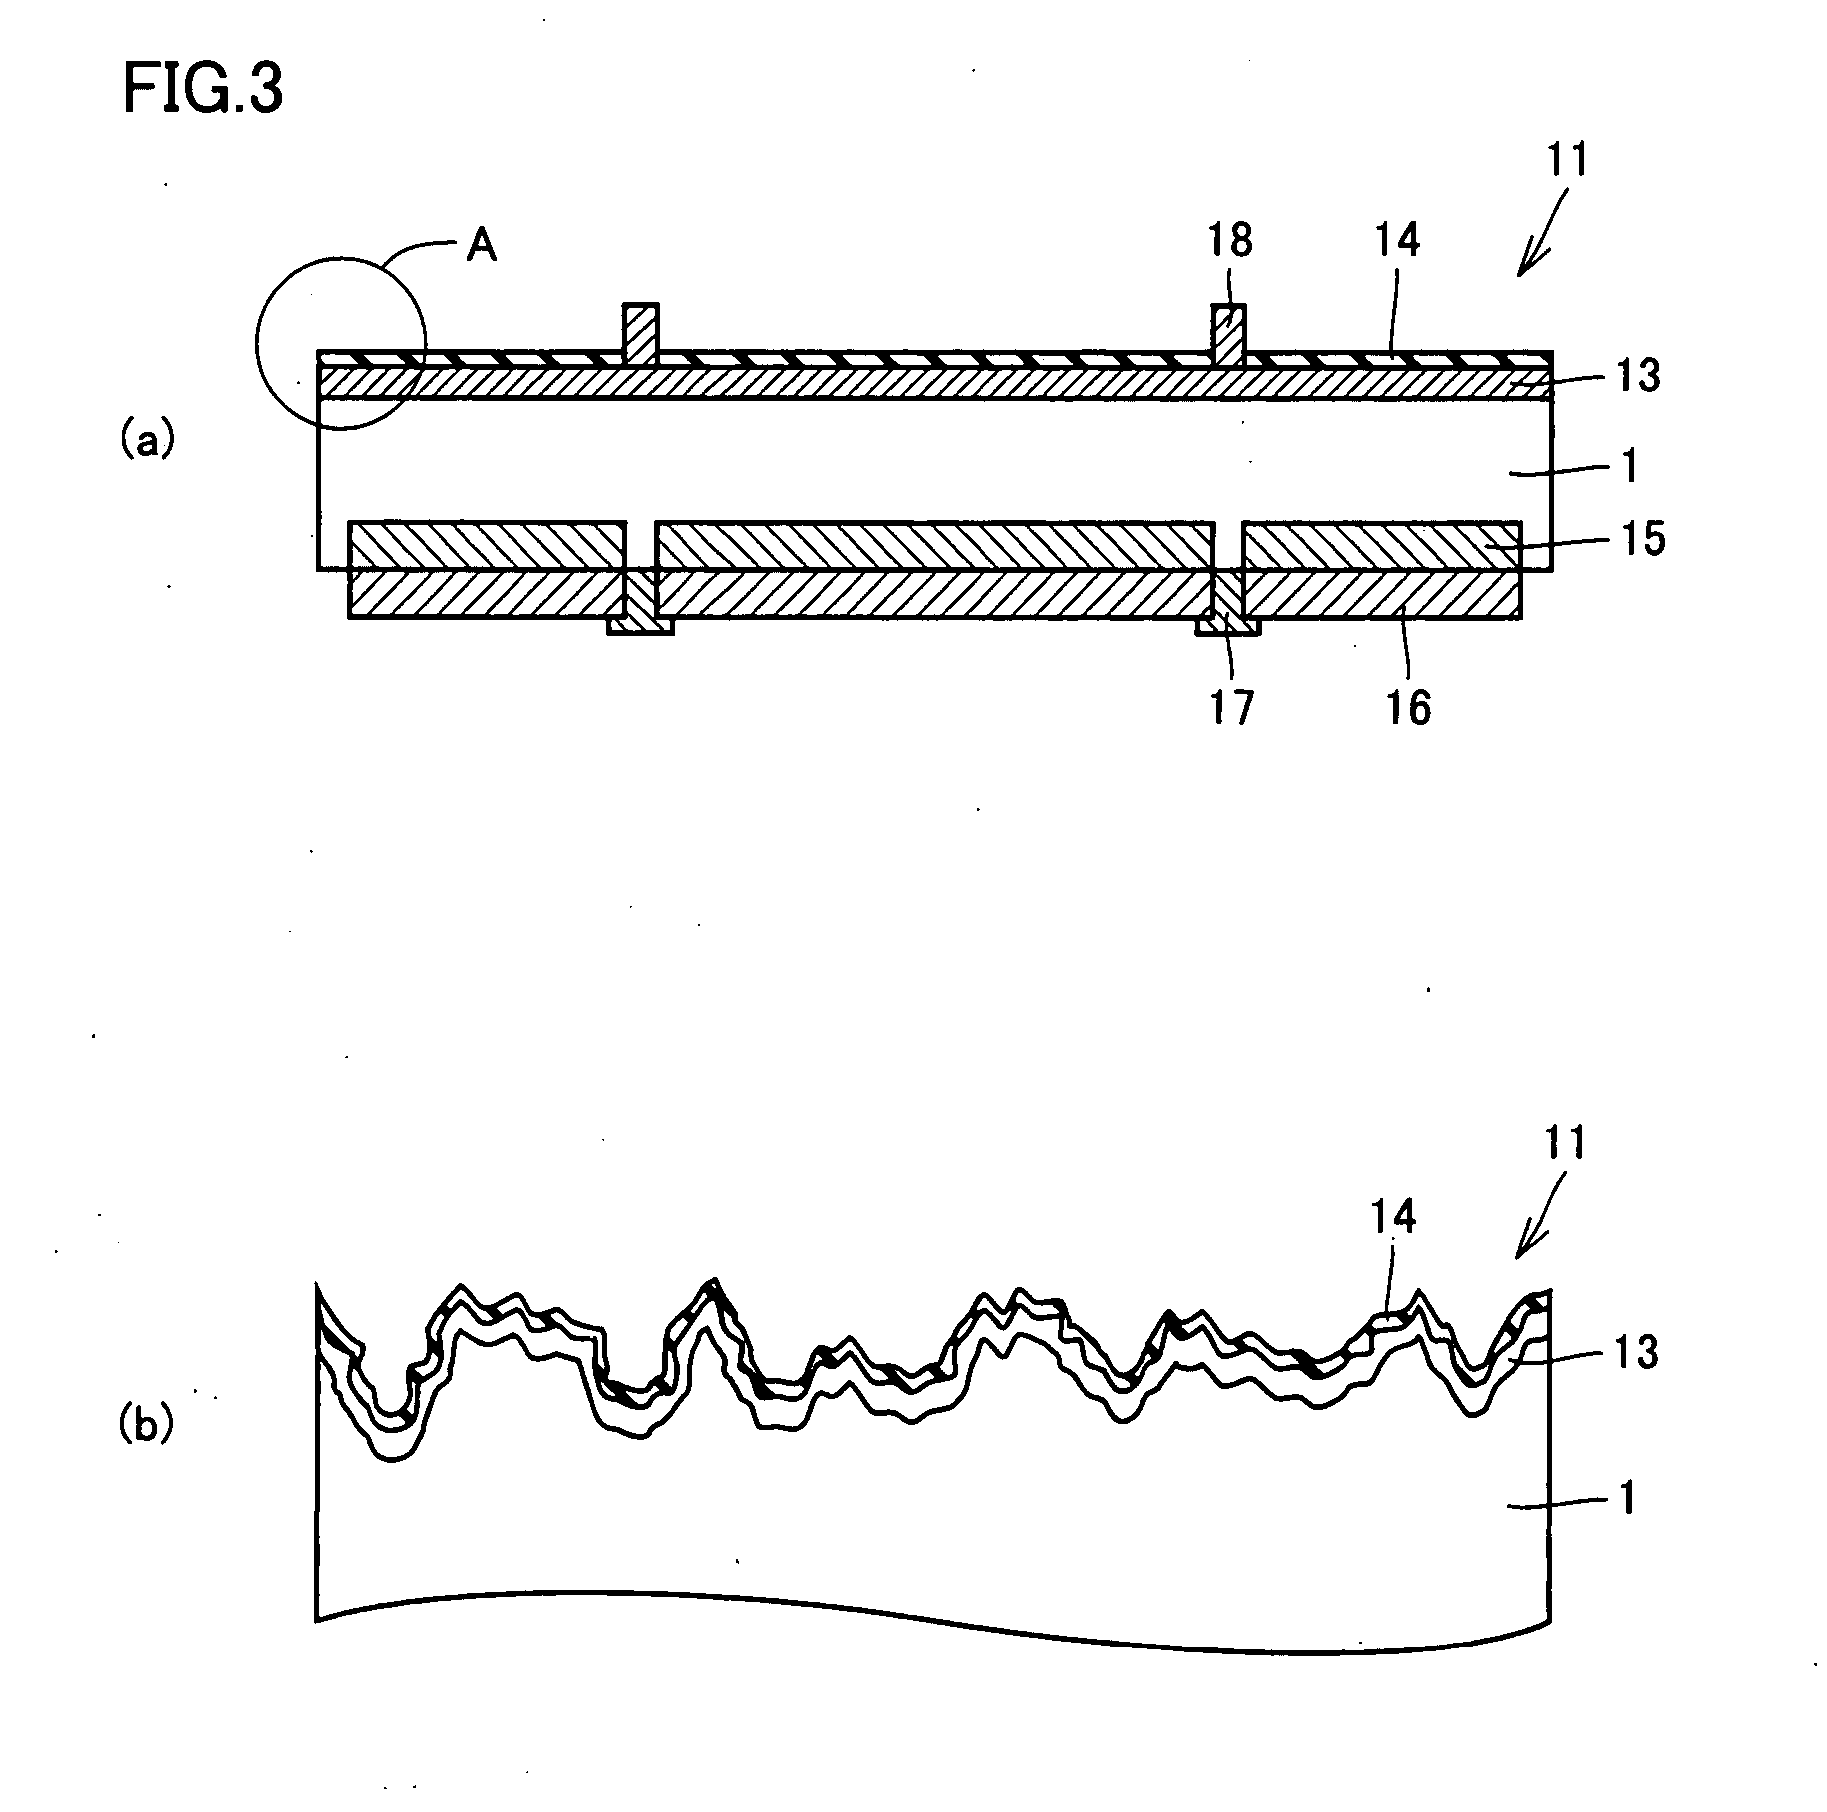 Crystalline Silicon Wafer, Crystalline Silicon Solar Cell, Method of Manufacturing Crystalline Silicon Wafer, and Method of Manufacturing Crystalline Silicon Solar Cell